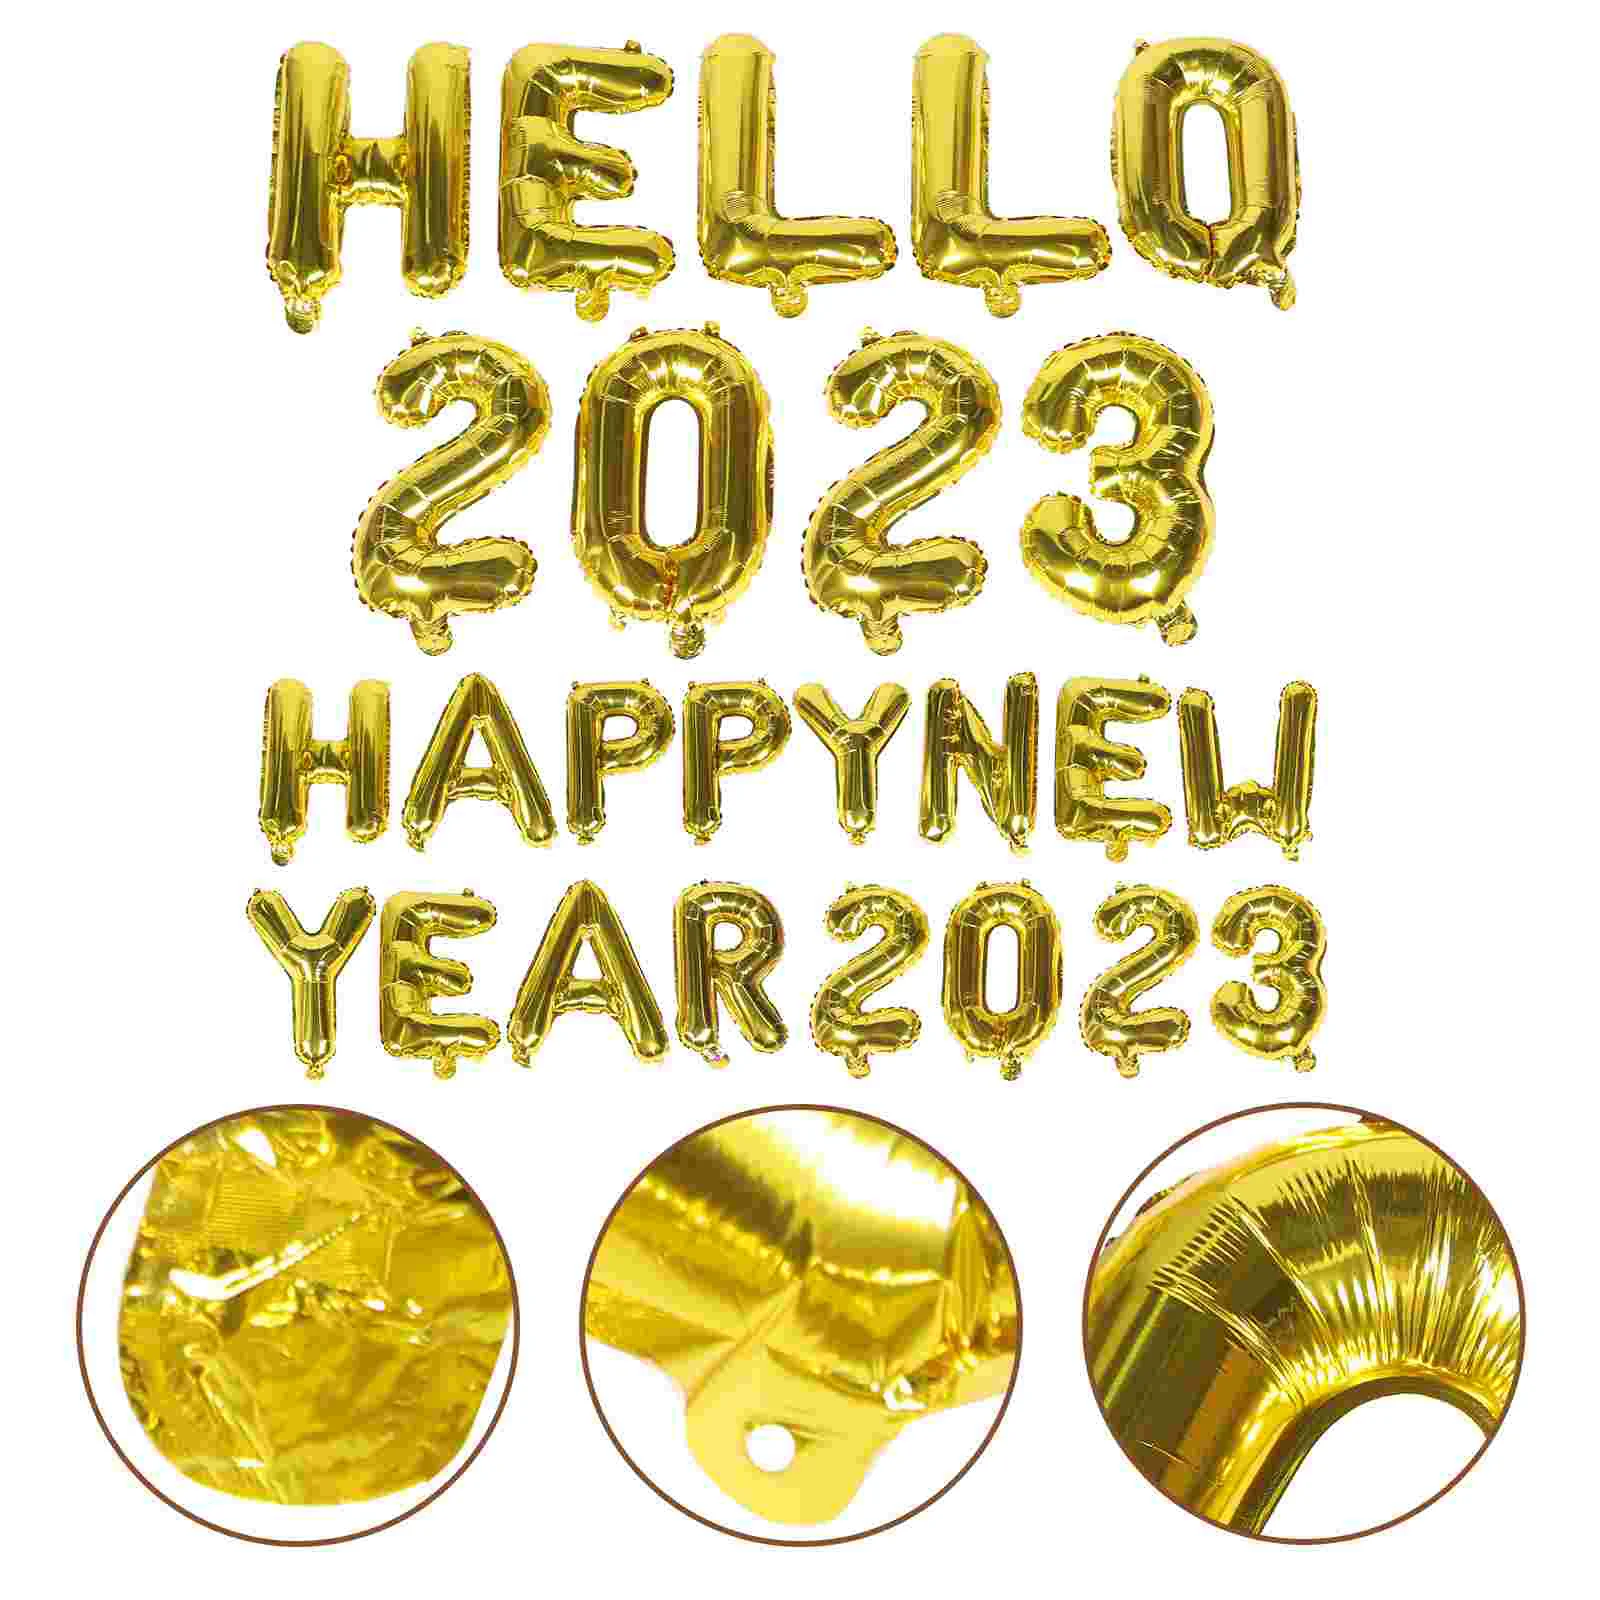 

Balloons New Year Party Foil Supplies Aluminum Balloon Eve Decorations Favors Happy Festival Props Letter Layout Festive Years